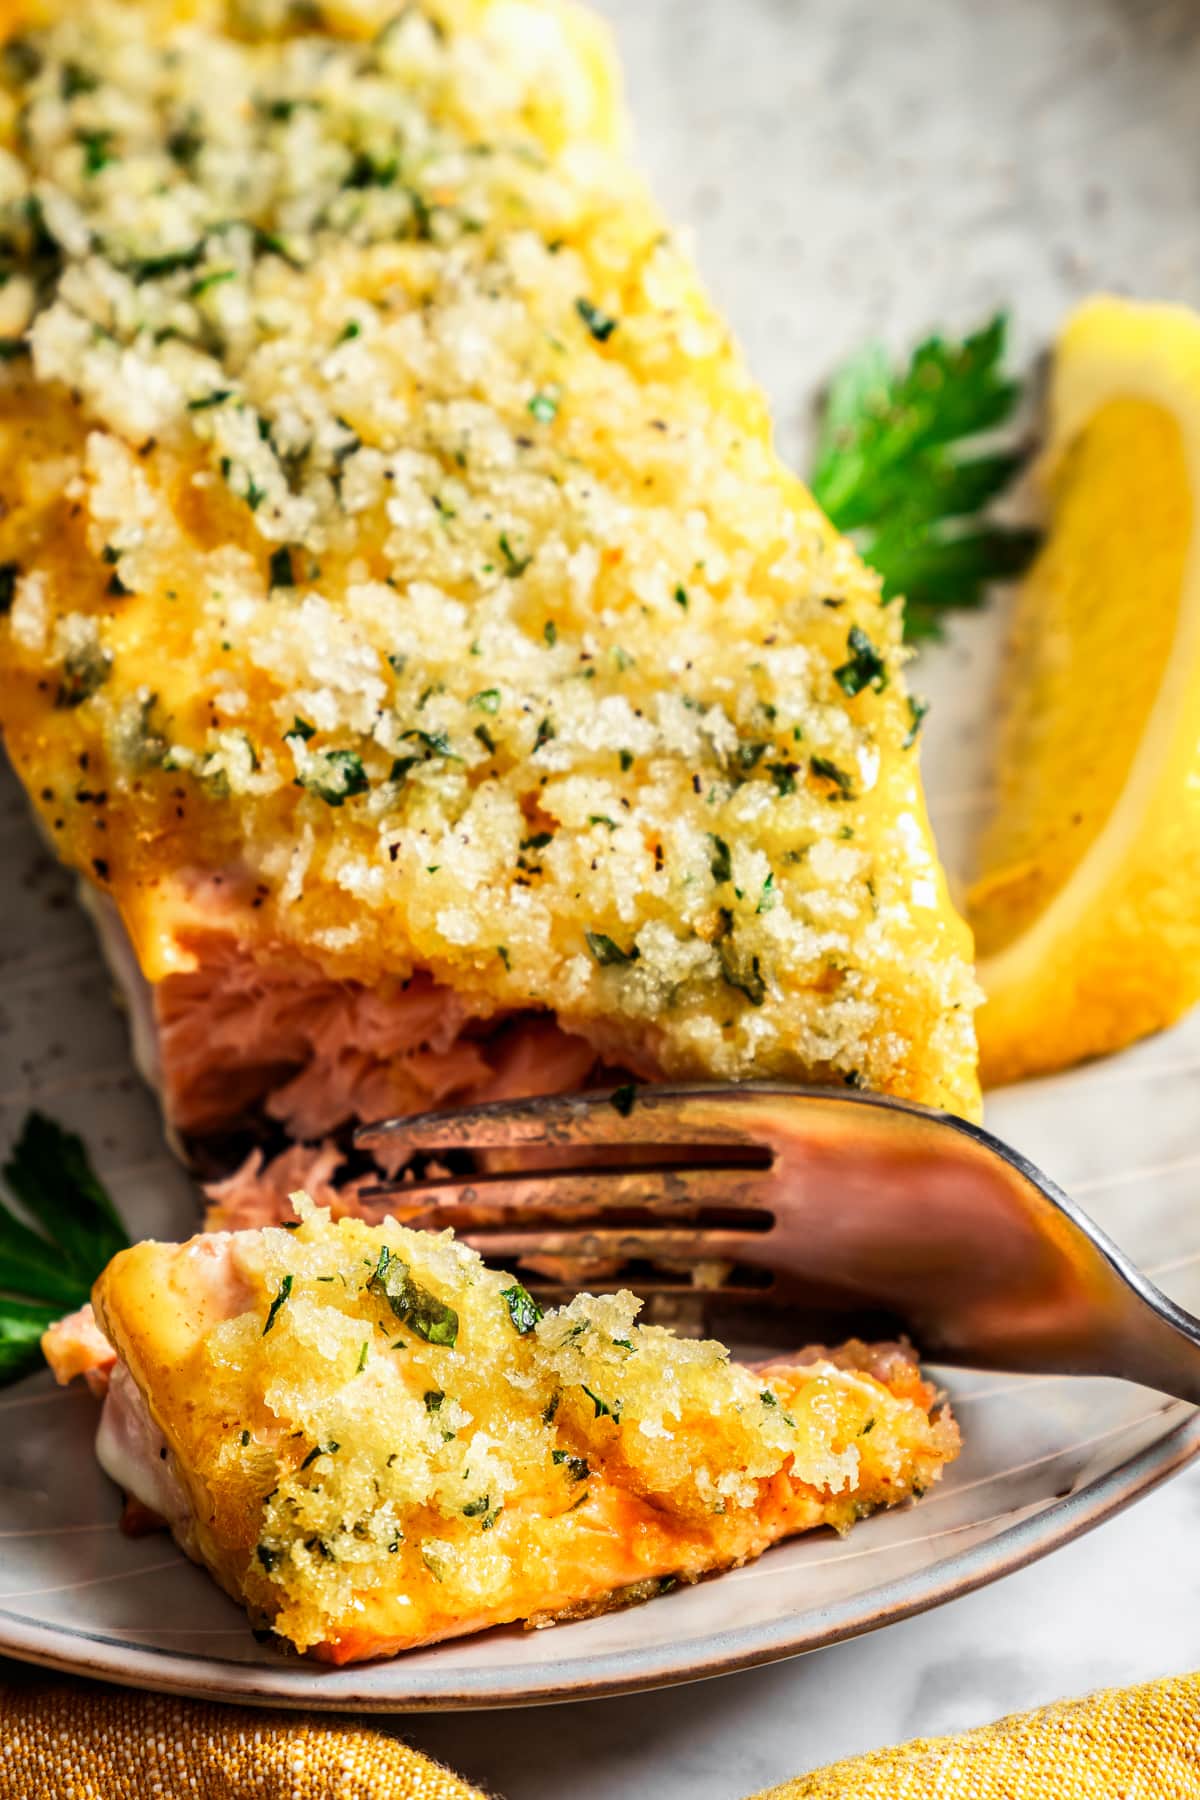 A fork cuts into the corner of a panko-crusted honey mustard salmon fillet on a plate next to a lemon wedge.